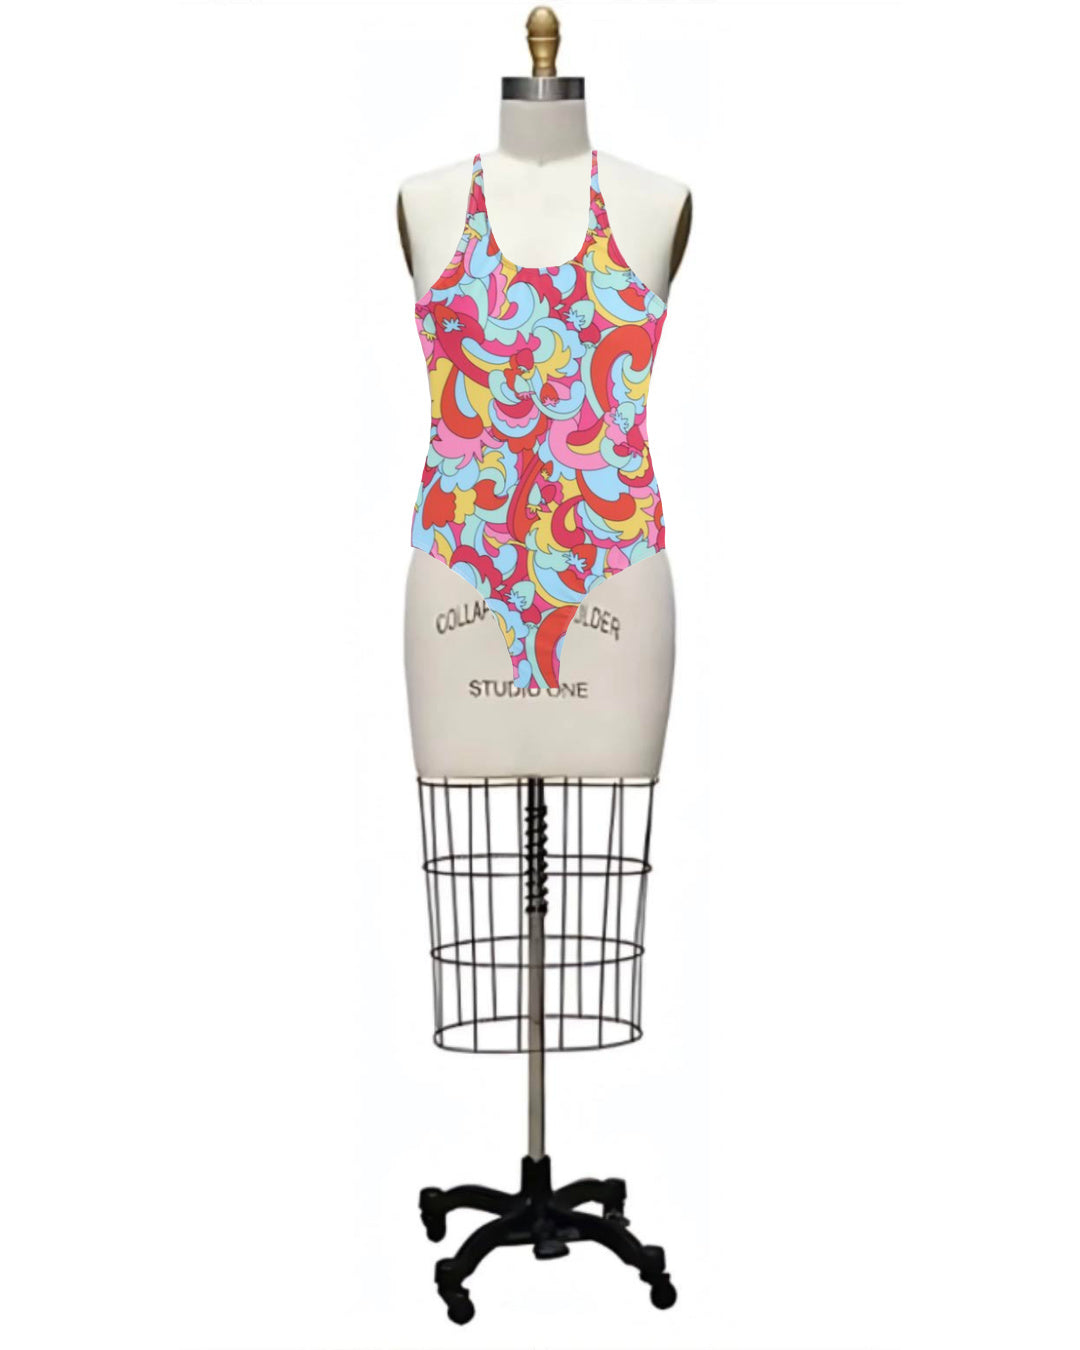 Max- the Psychedelic Strawberry Print Swimsuit